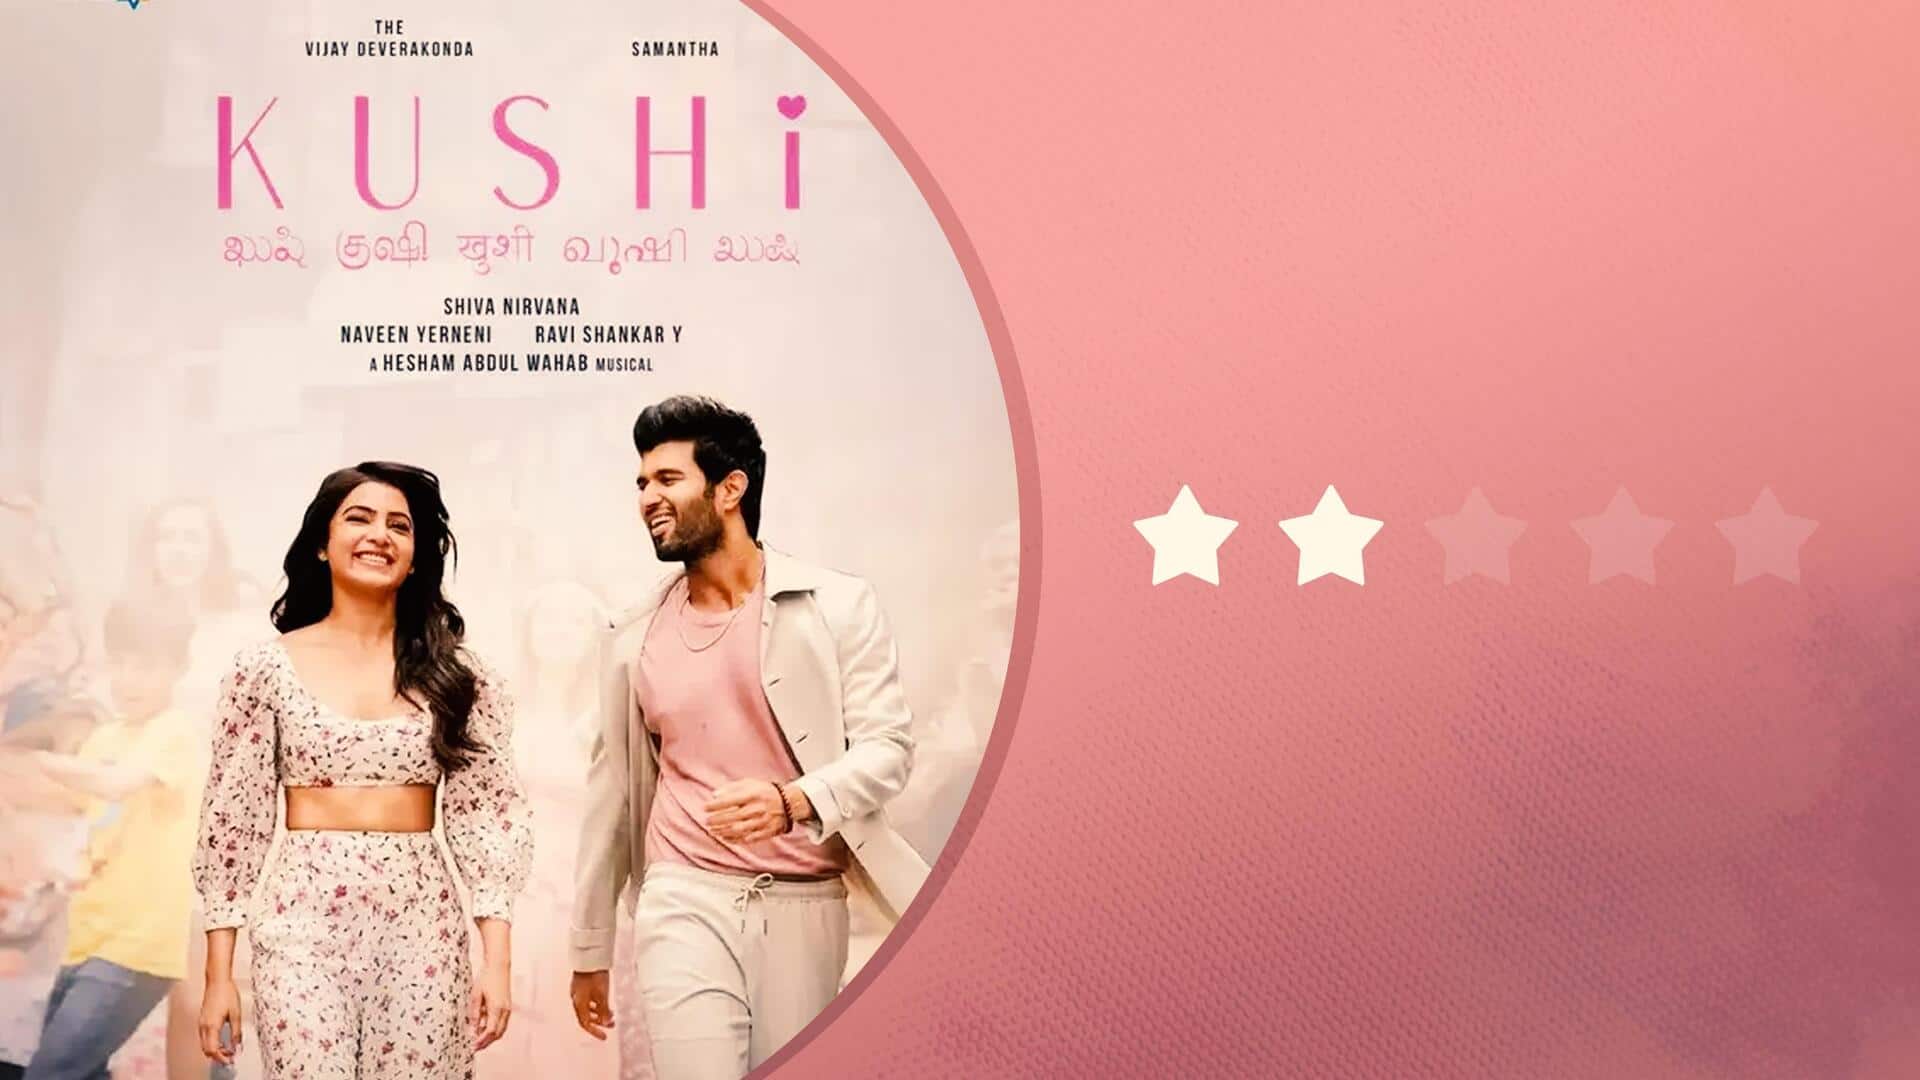 'Kushi' review: Regular love story with its share of flaws